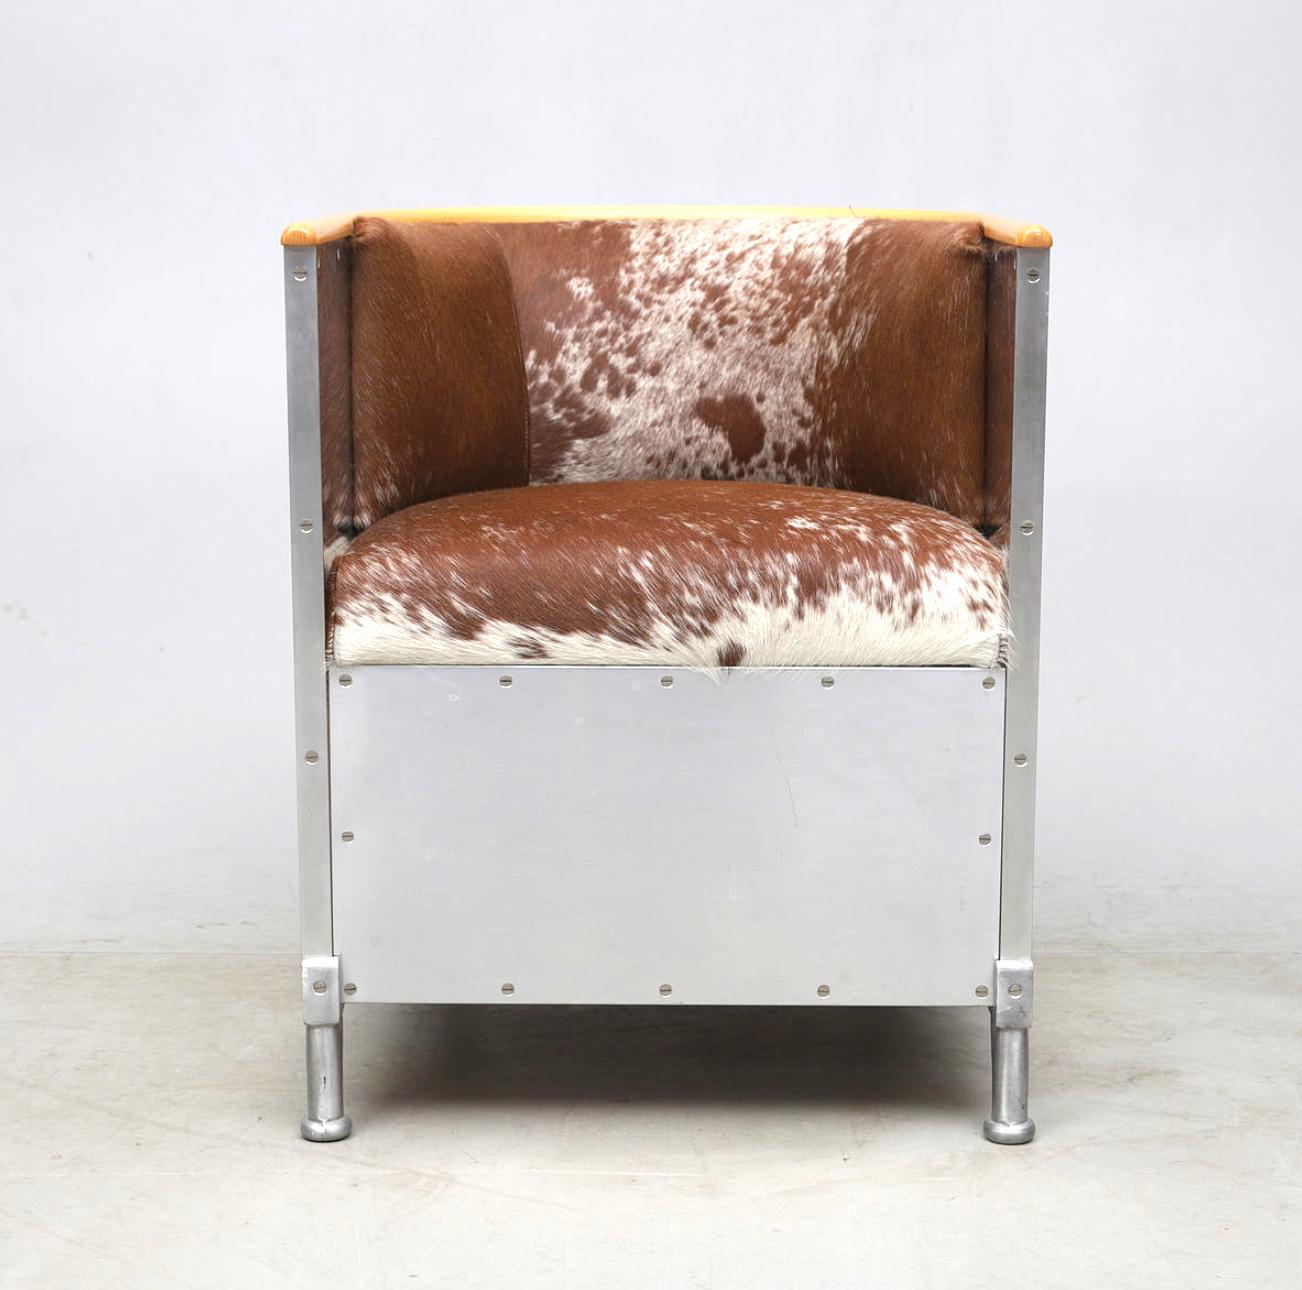 Scandinavian Modern The armchair  by MATS THESELIUS. Limited edition of 33. For Sale